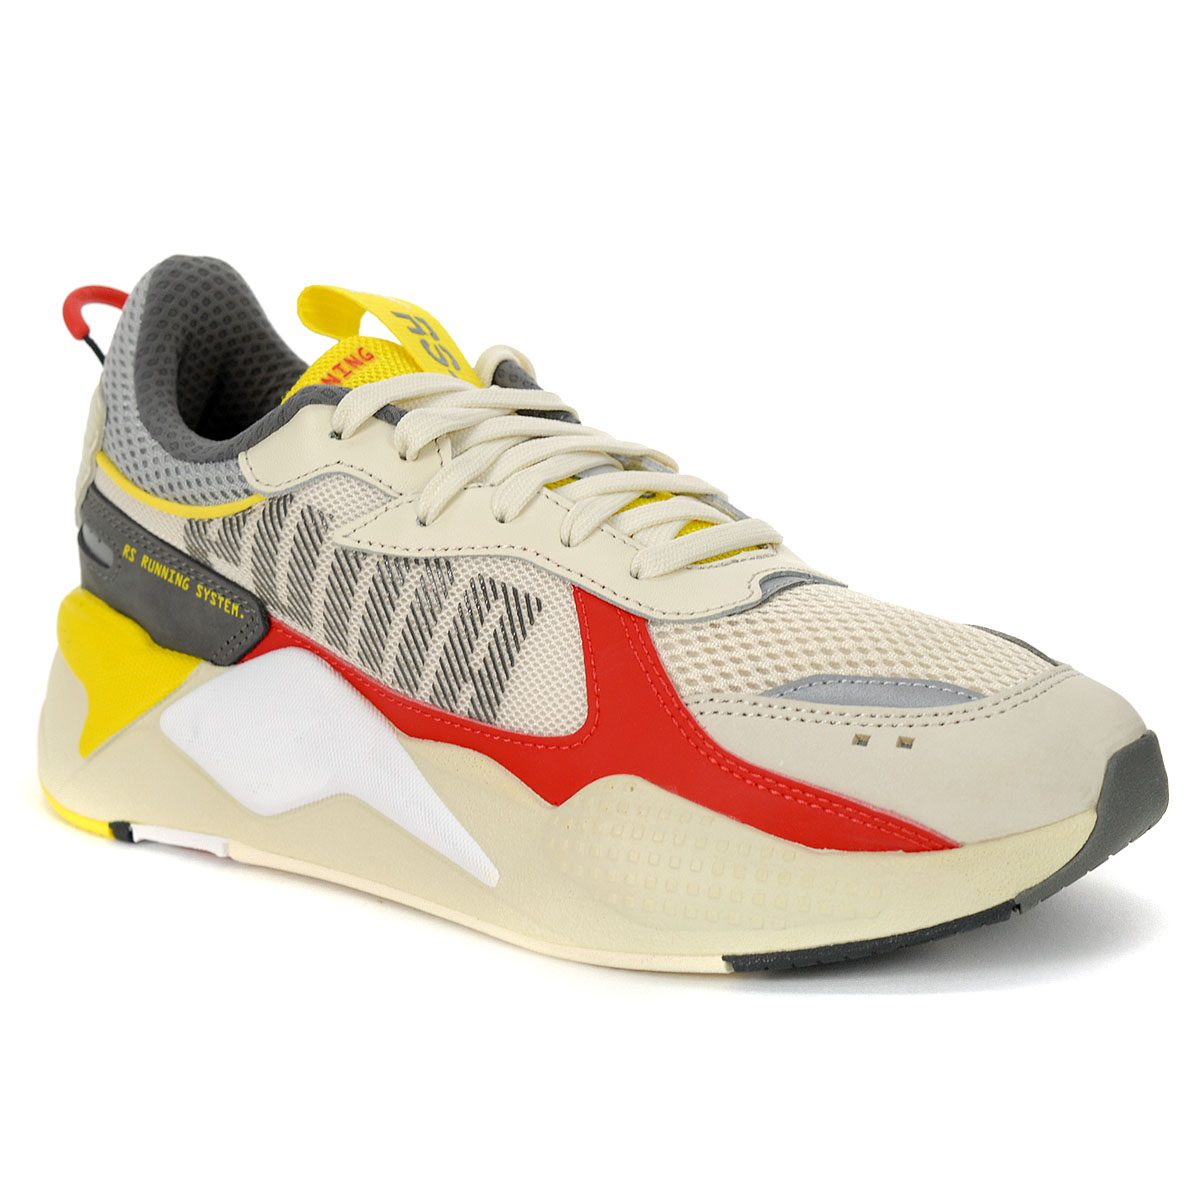 Puma Men's RS-X Bold Whisper White/High Risk Red Sneakers 37271503 ...